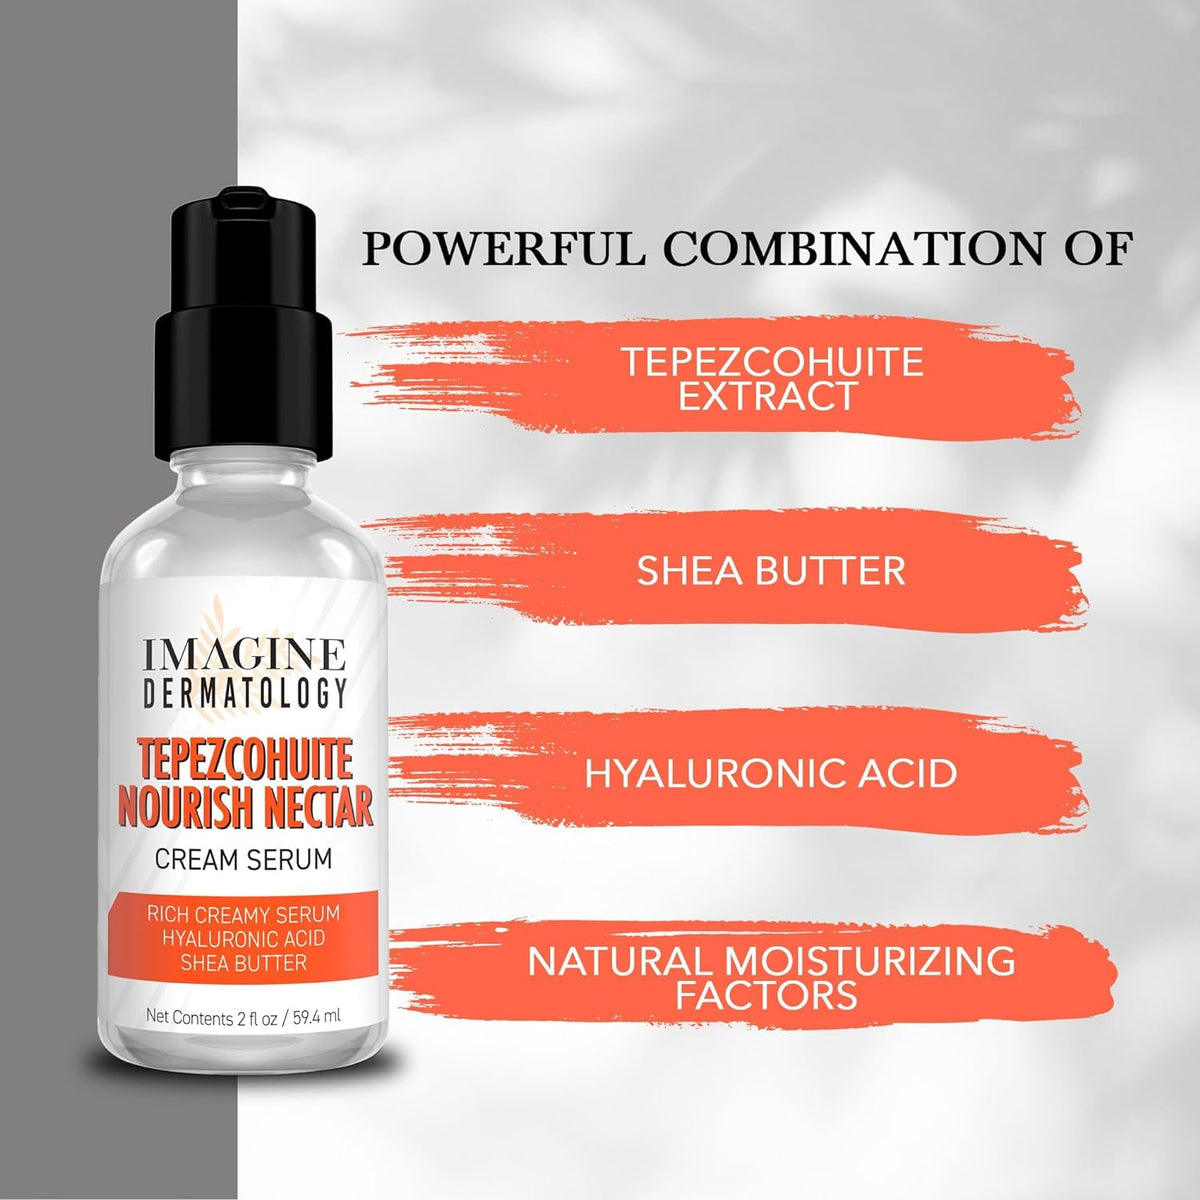 Tepezcohuite Nourish Nectar Concentrated Hyaluronic Acid Shea Butter Cream Serum Moisturizer Mimosa Tenuiflora Bark Extract Used by Mayan Healers Unscented Paraben Free Made in USA 2 fl oz/ 59.4 ml